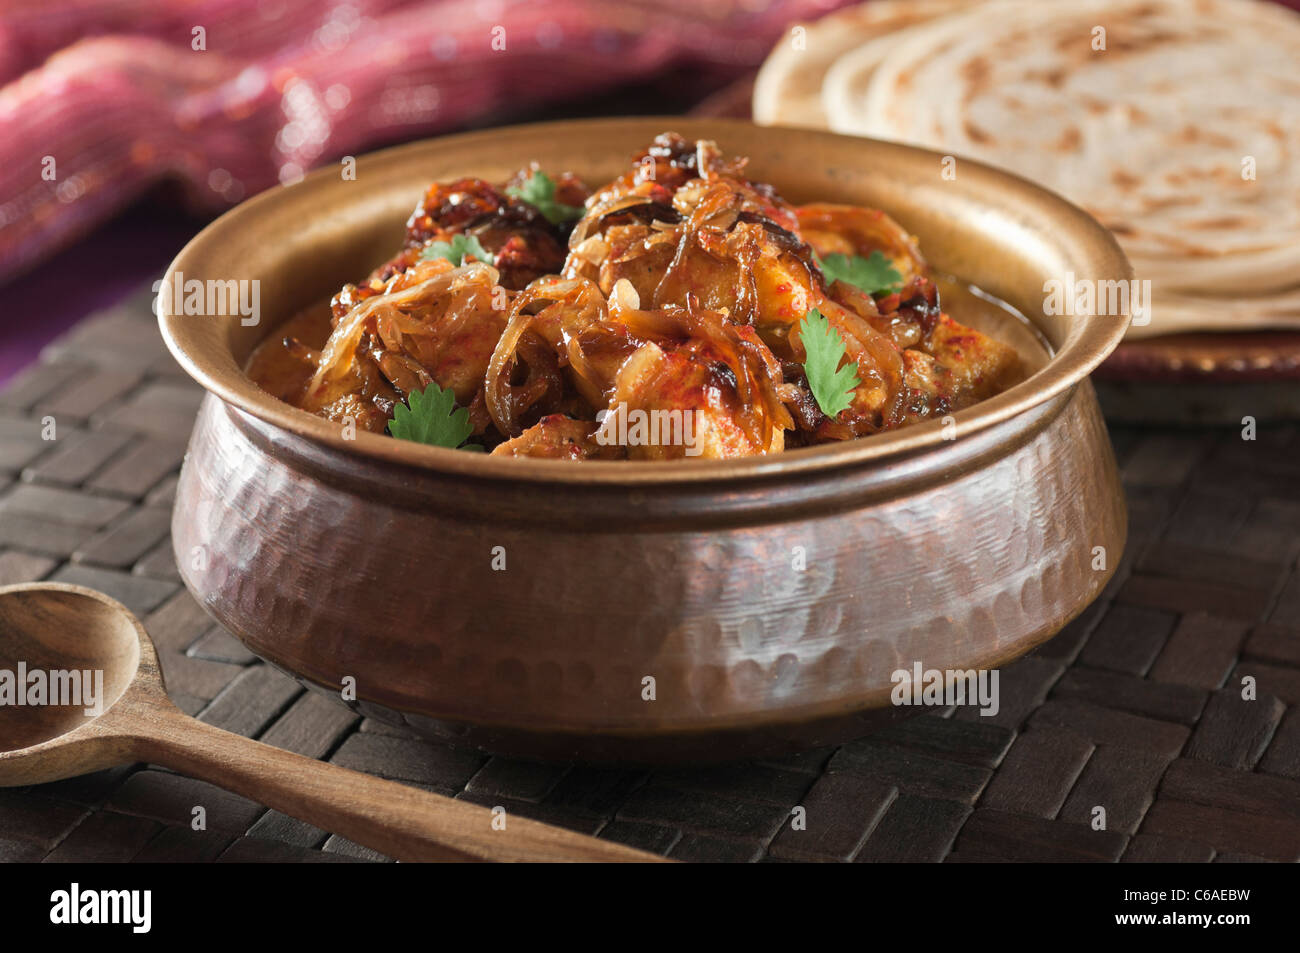 Chicken dopiaza curry Indian food Stock Photo